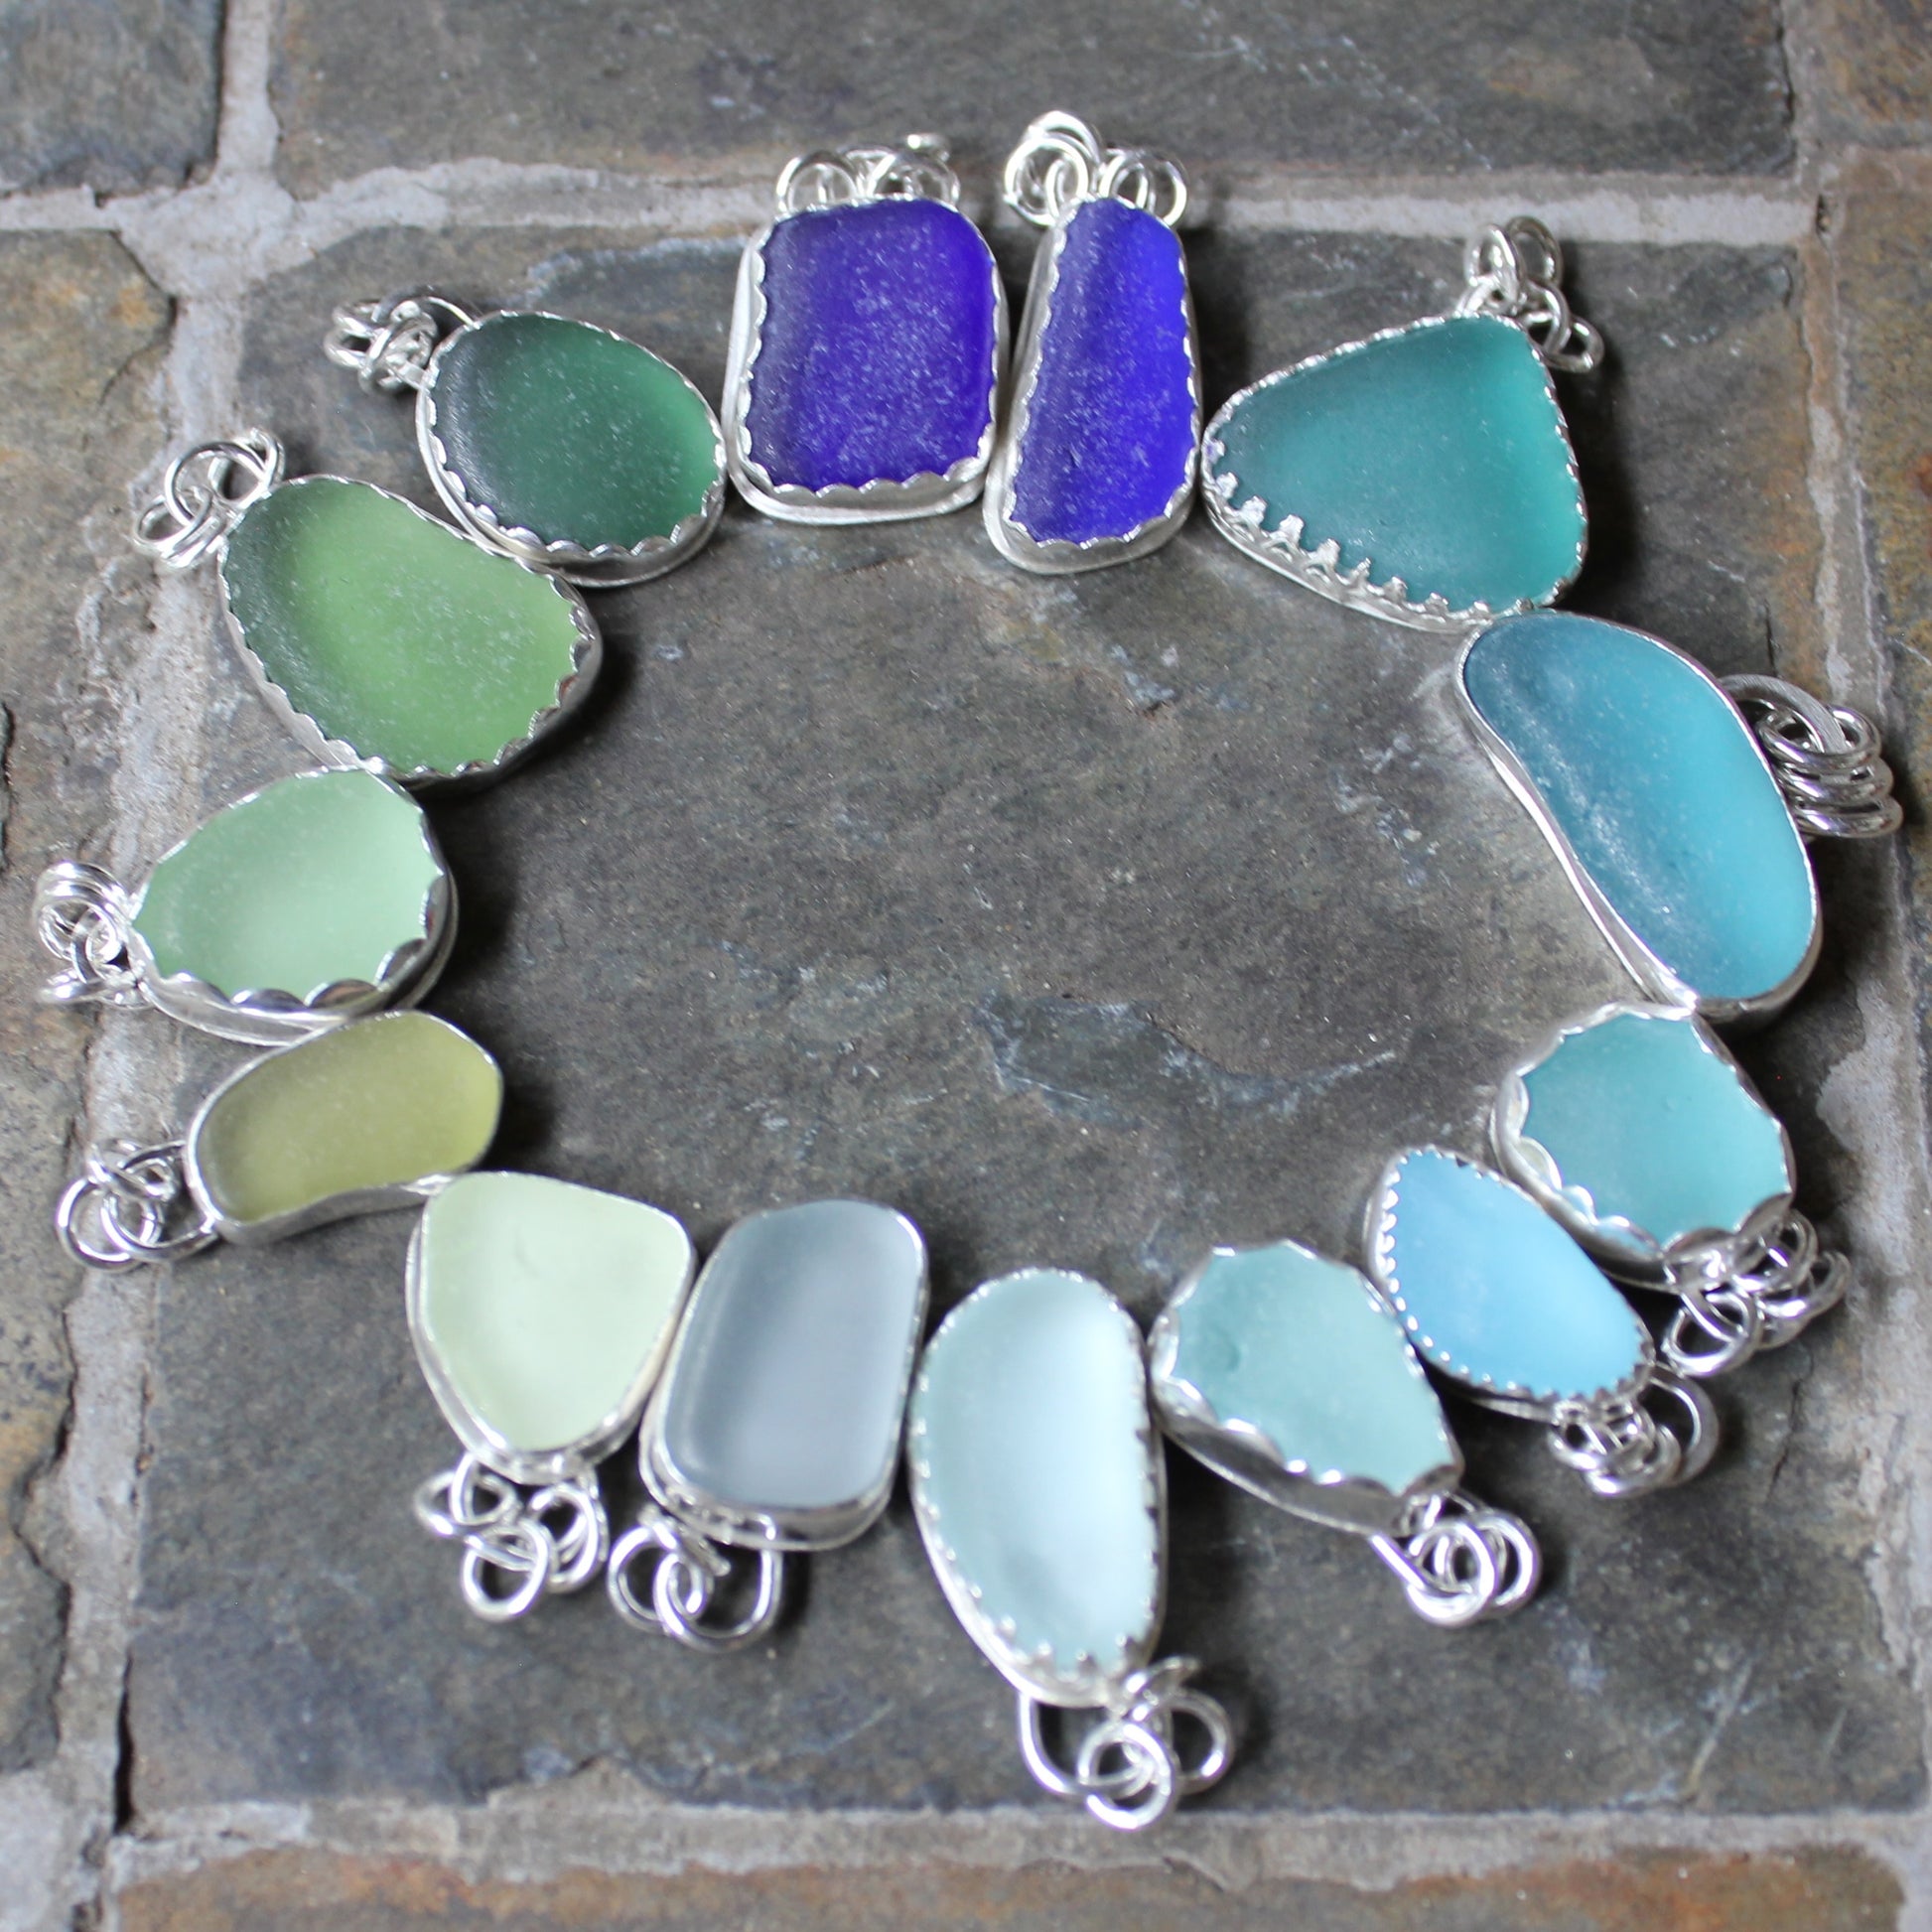 A circle of handmade sterling silver sea glass pendants in shades of blues and greens